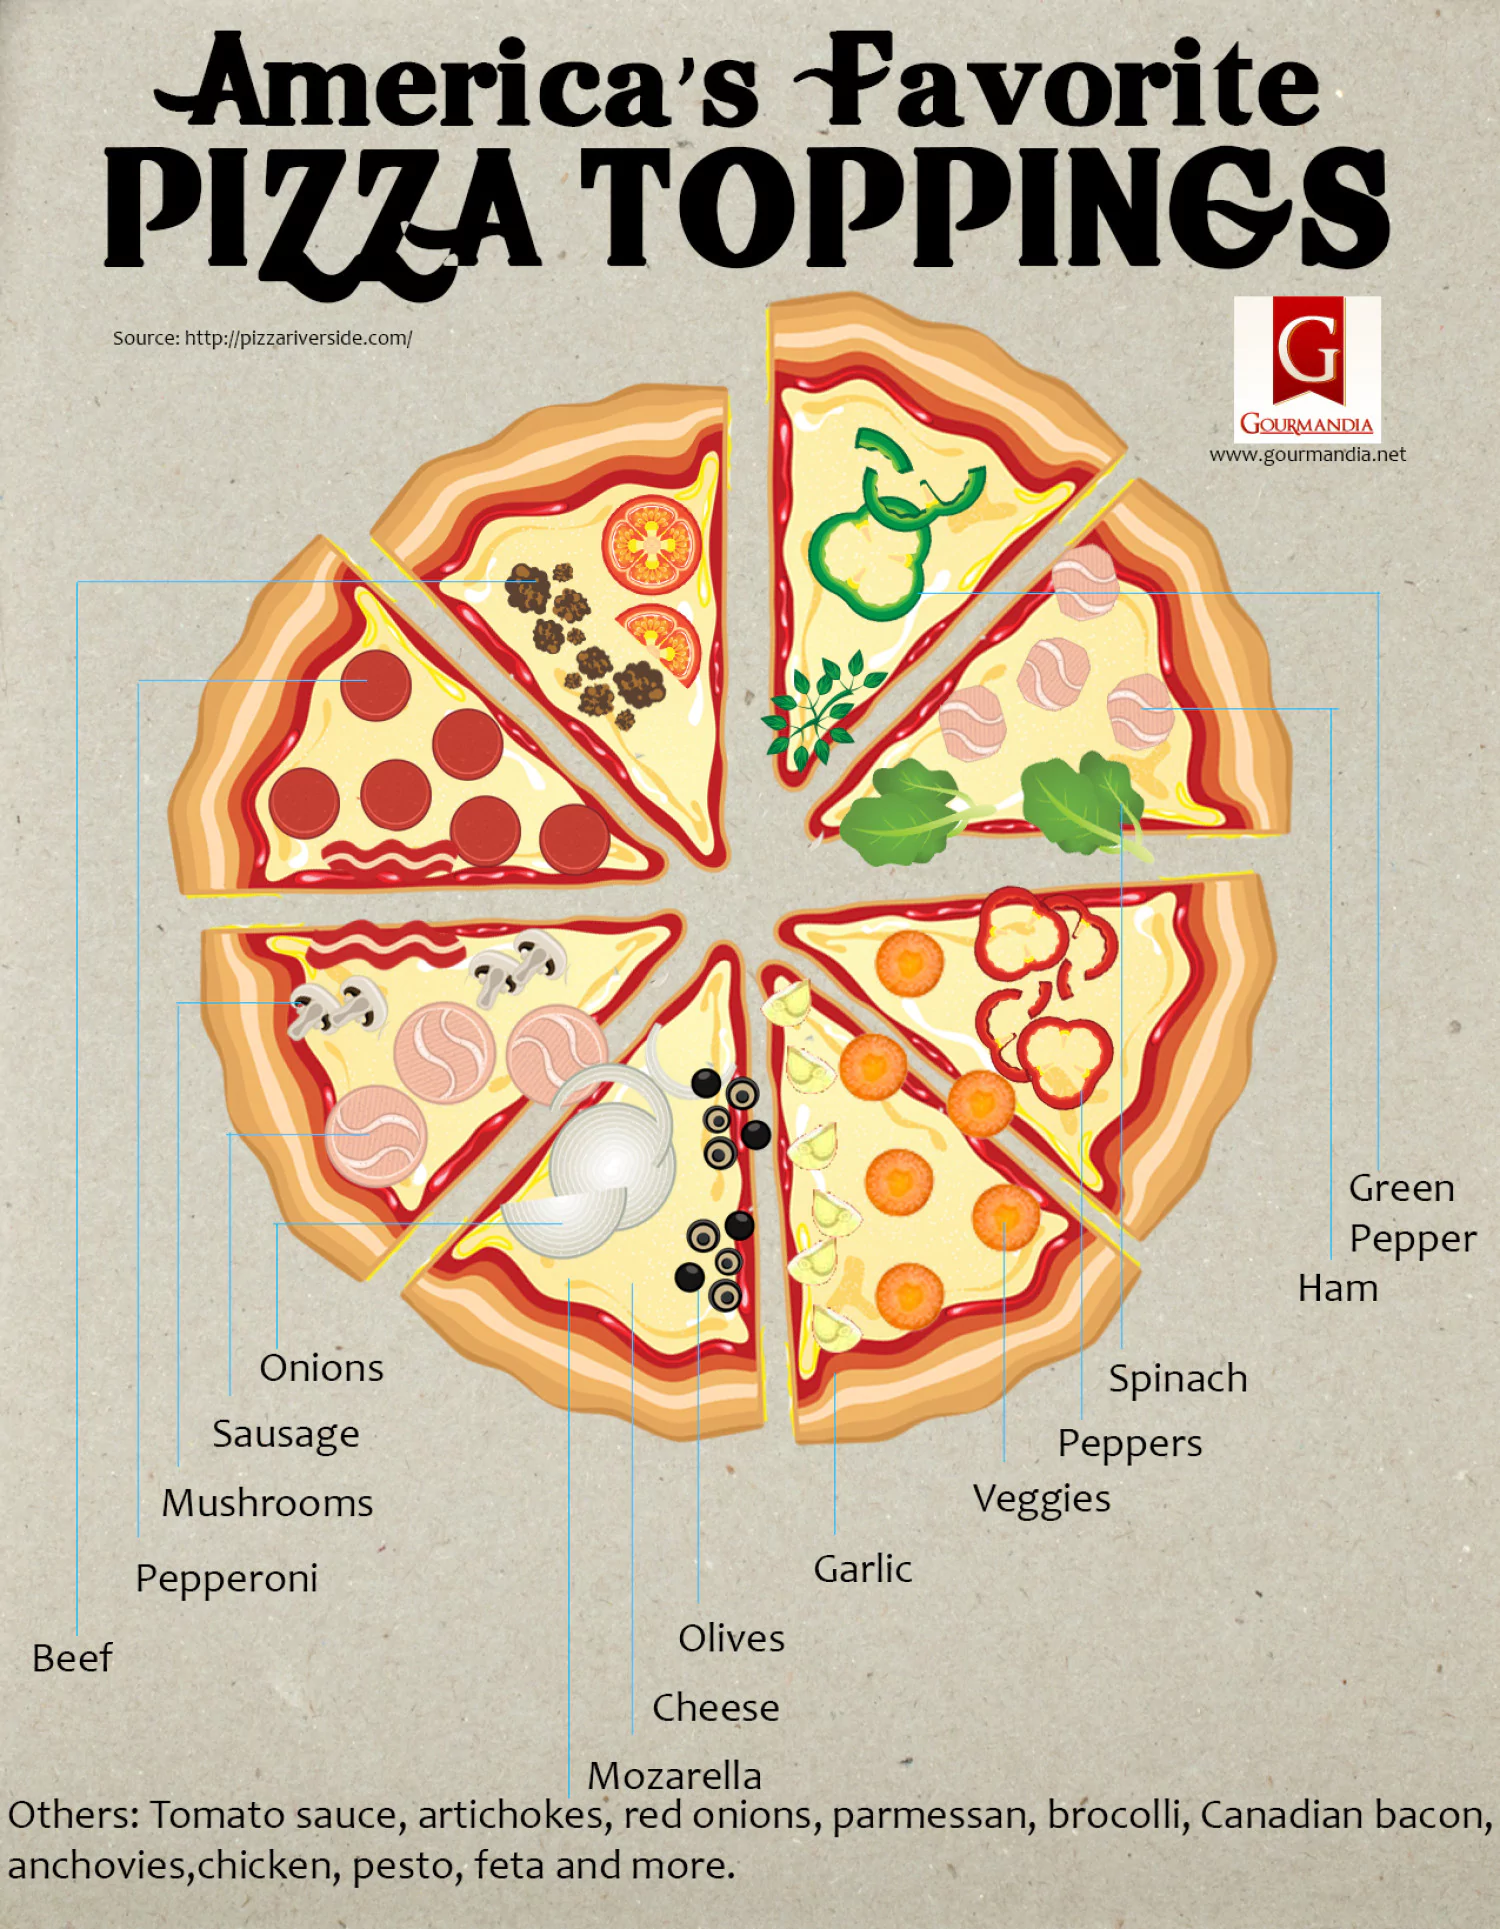 Americas Favorite Pizza Toppings